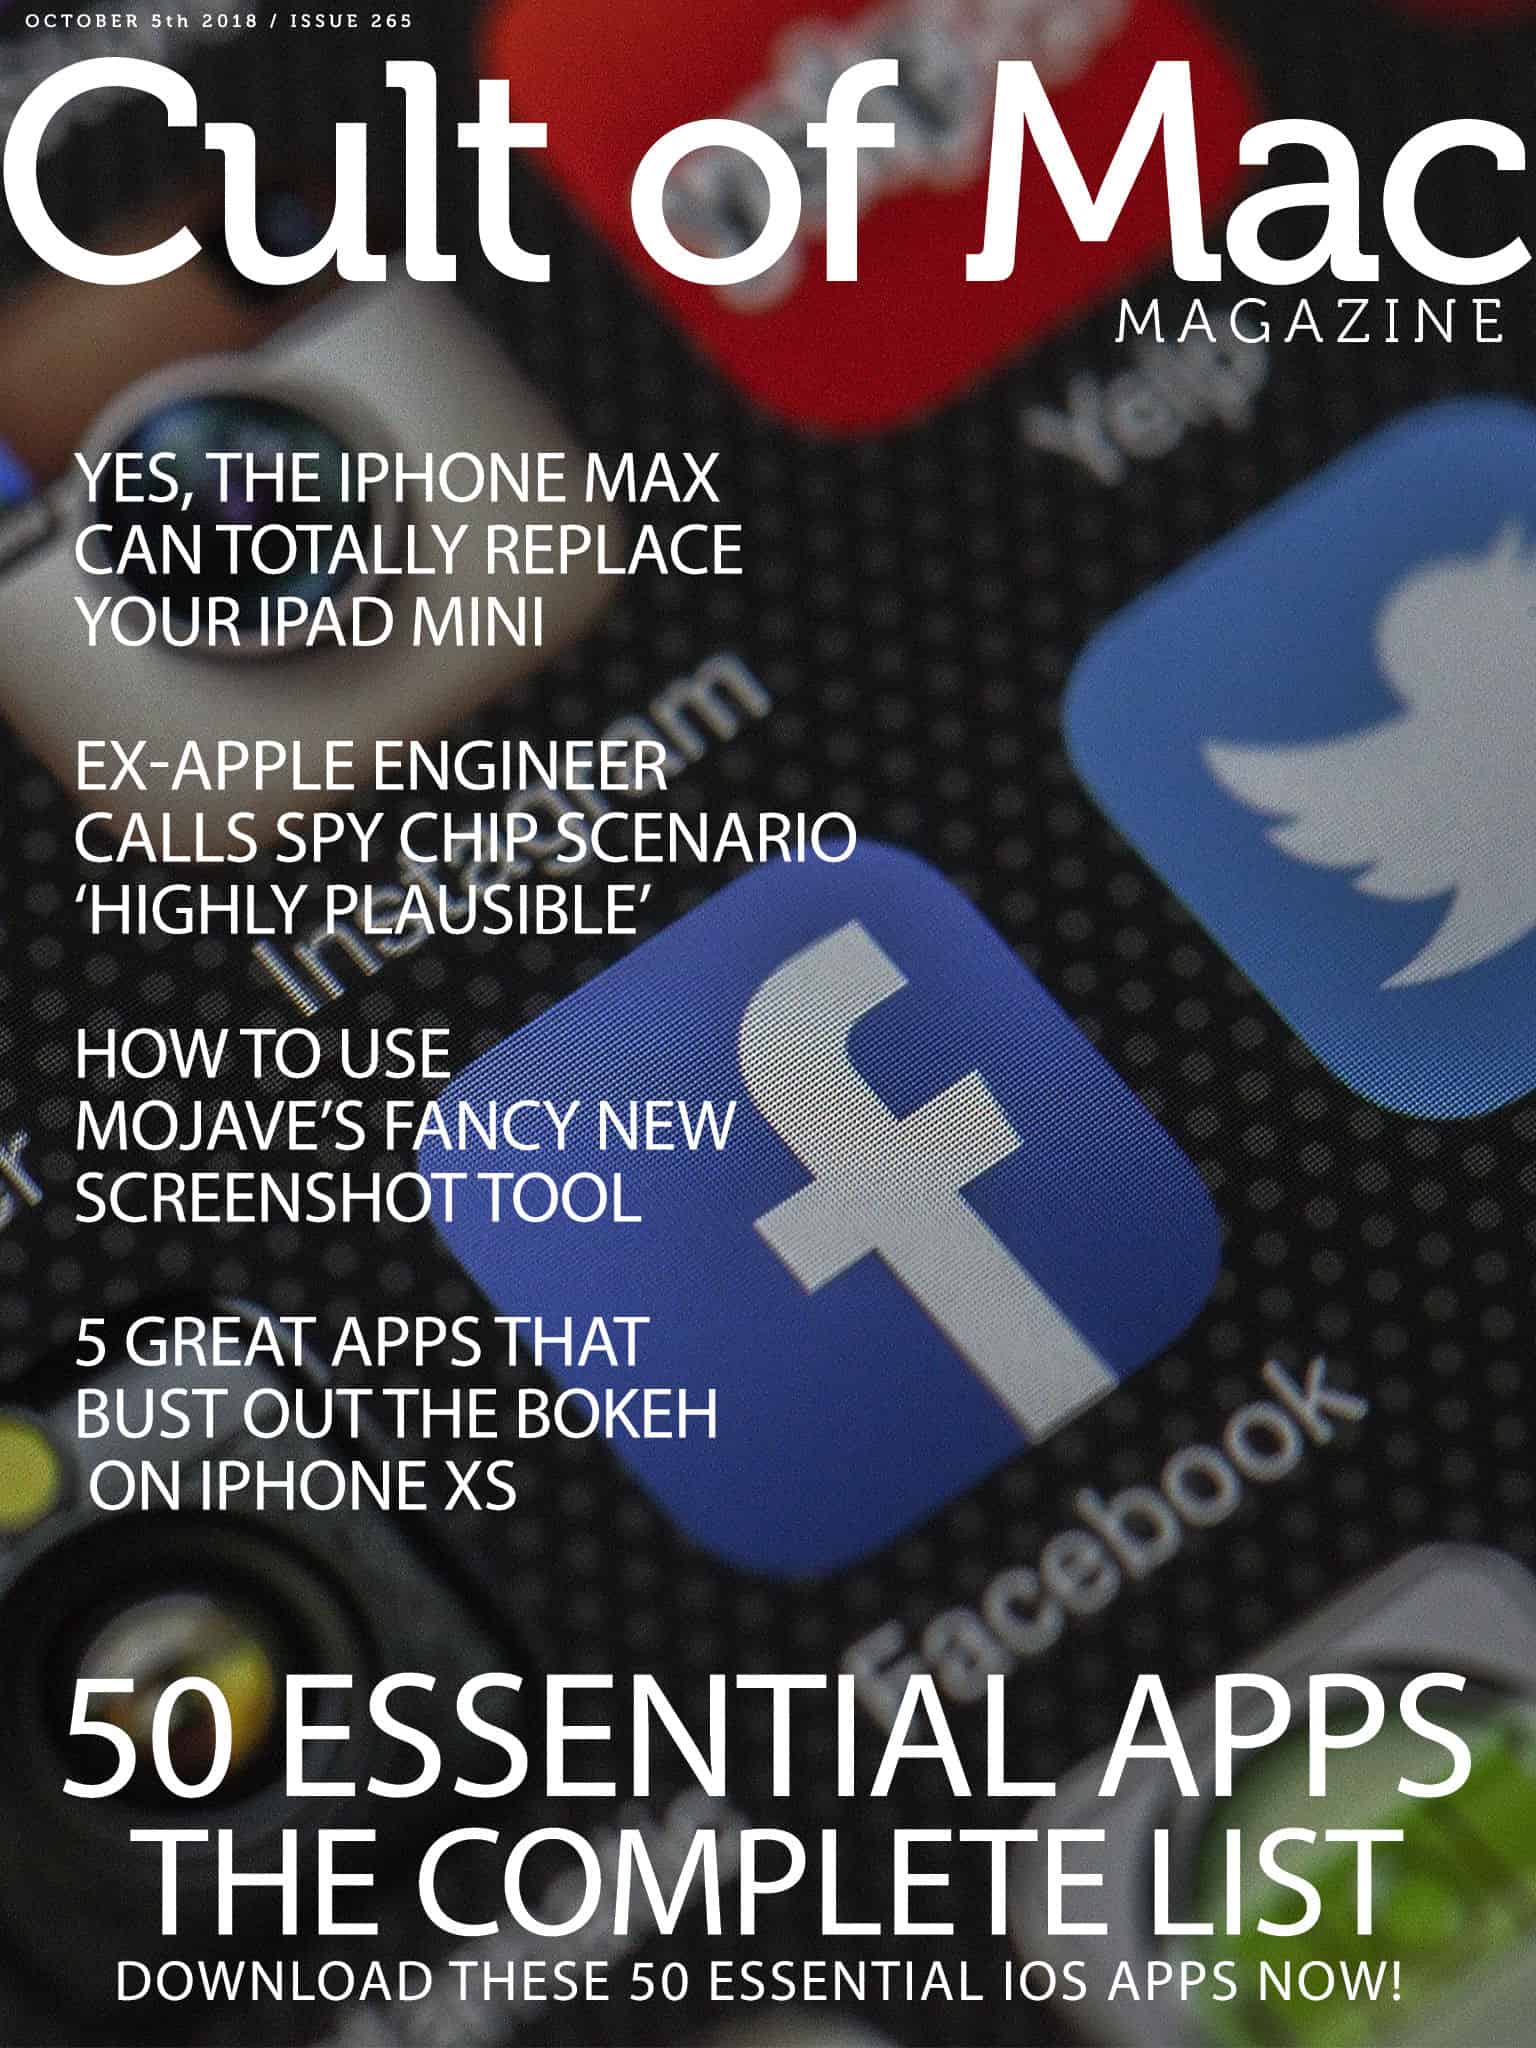 Get our 50 Essential iOS Apps to boost your iPhone or iPad experience.